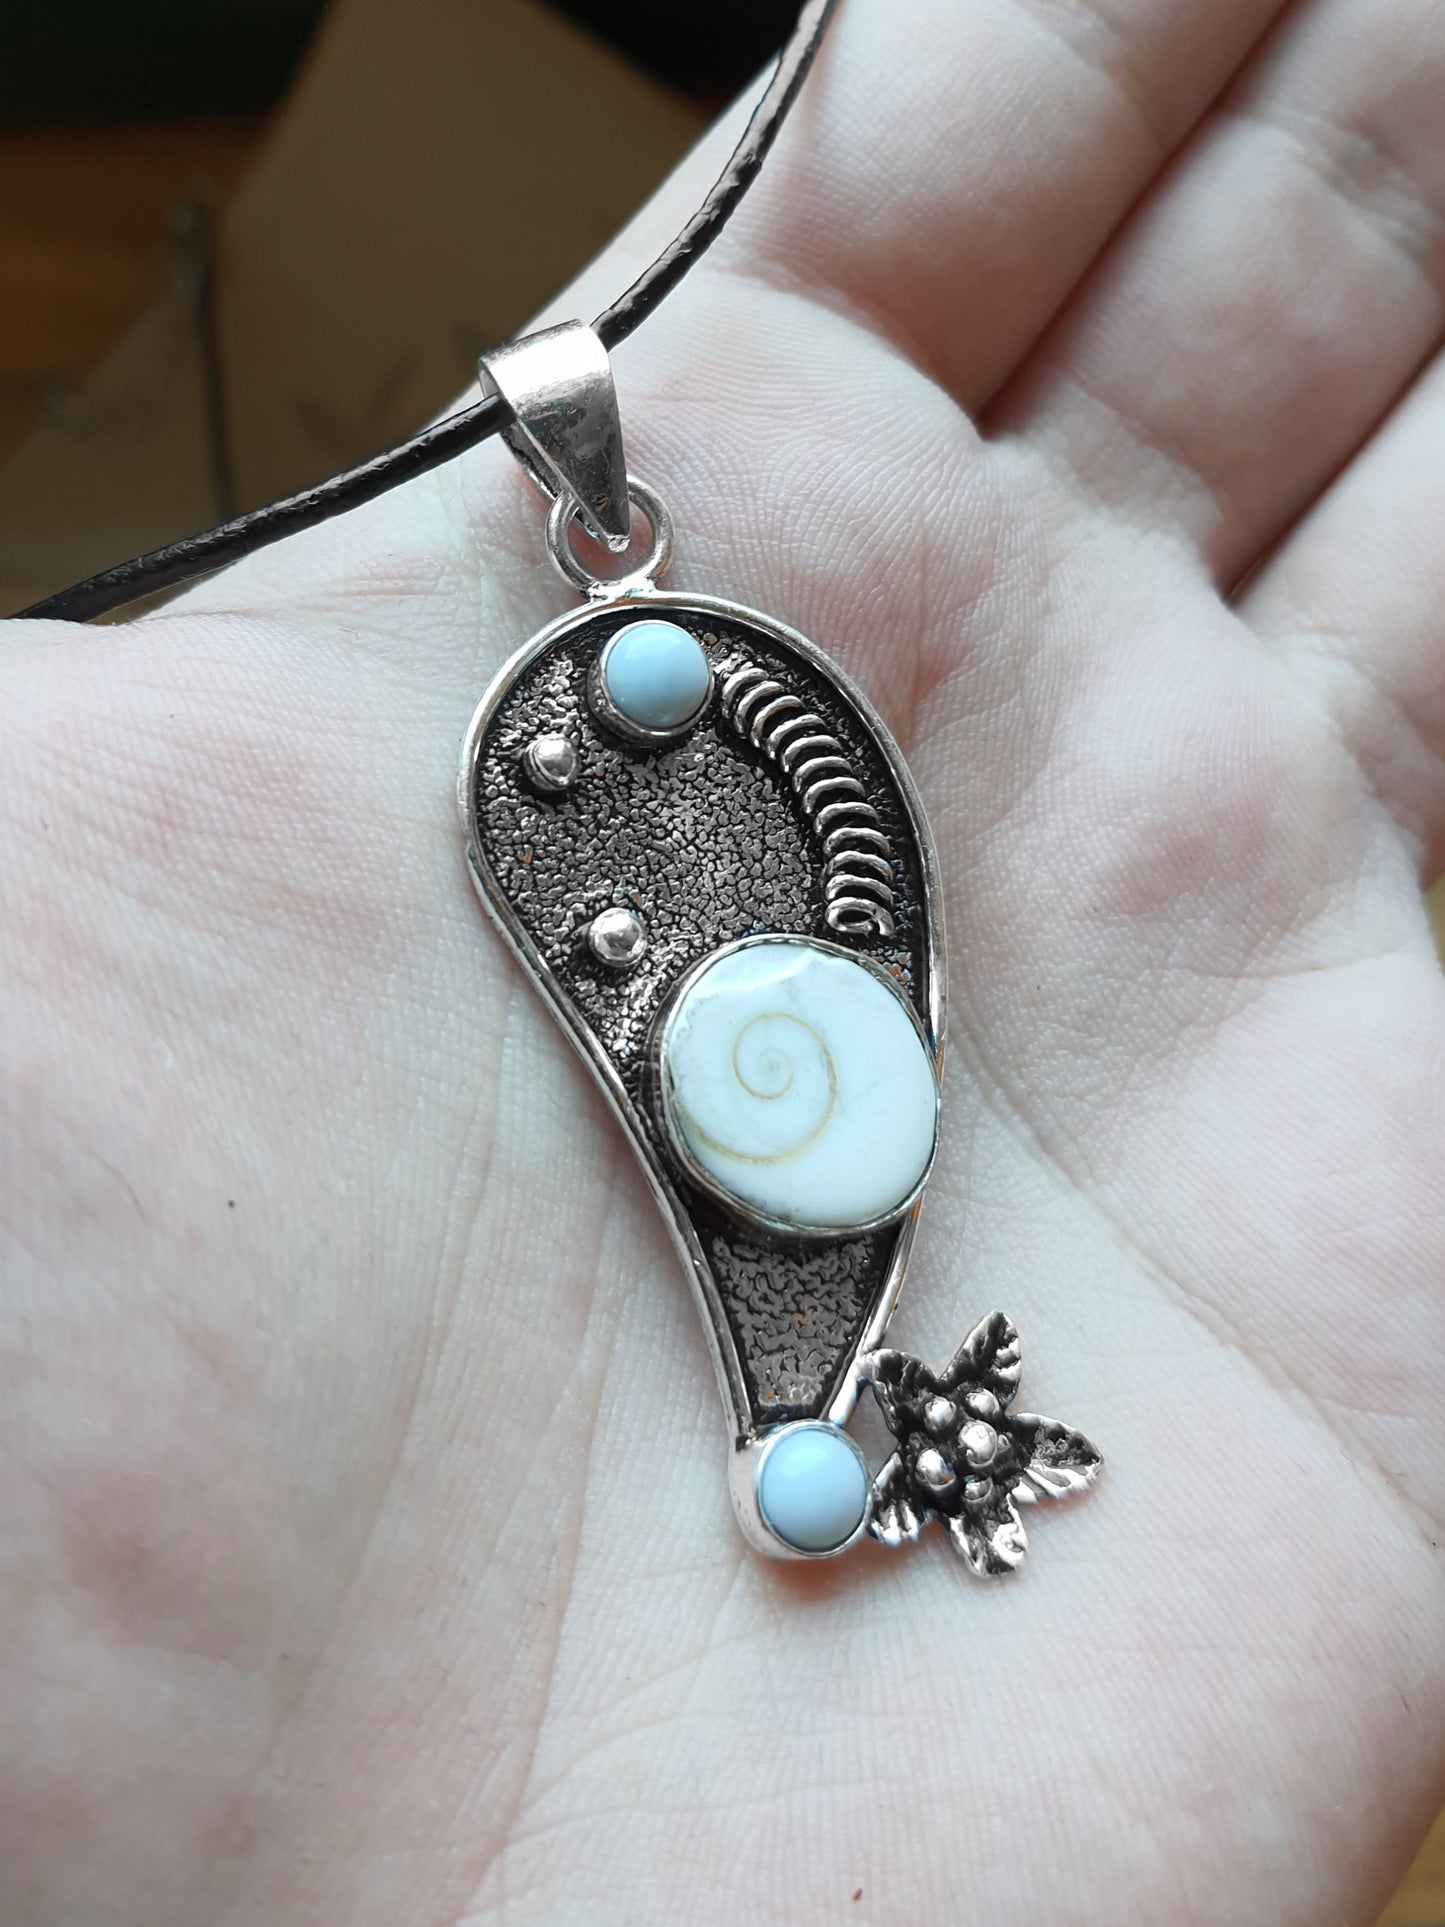 Shiva Eye And Owyhee Opal Pendant In Sterling Silver, Multi Stone Crystal Necklace, One Of A Kind Jewelry